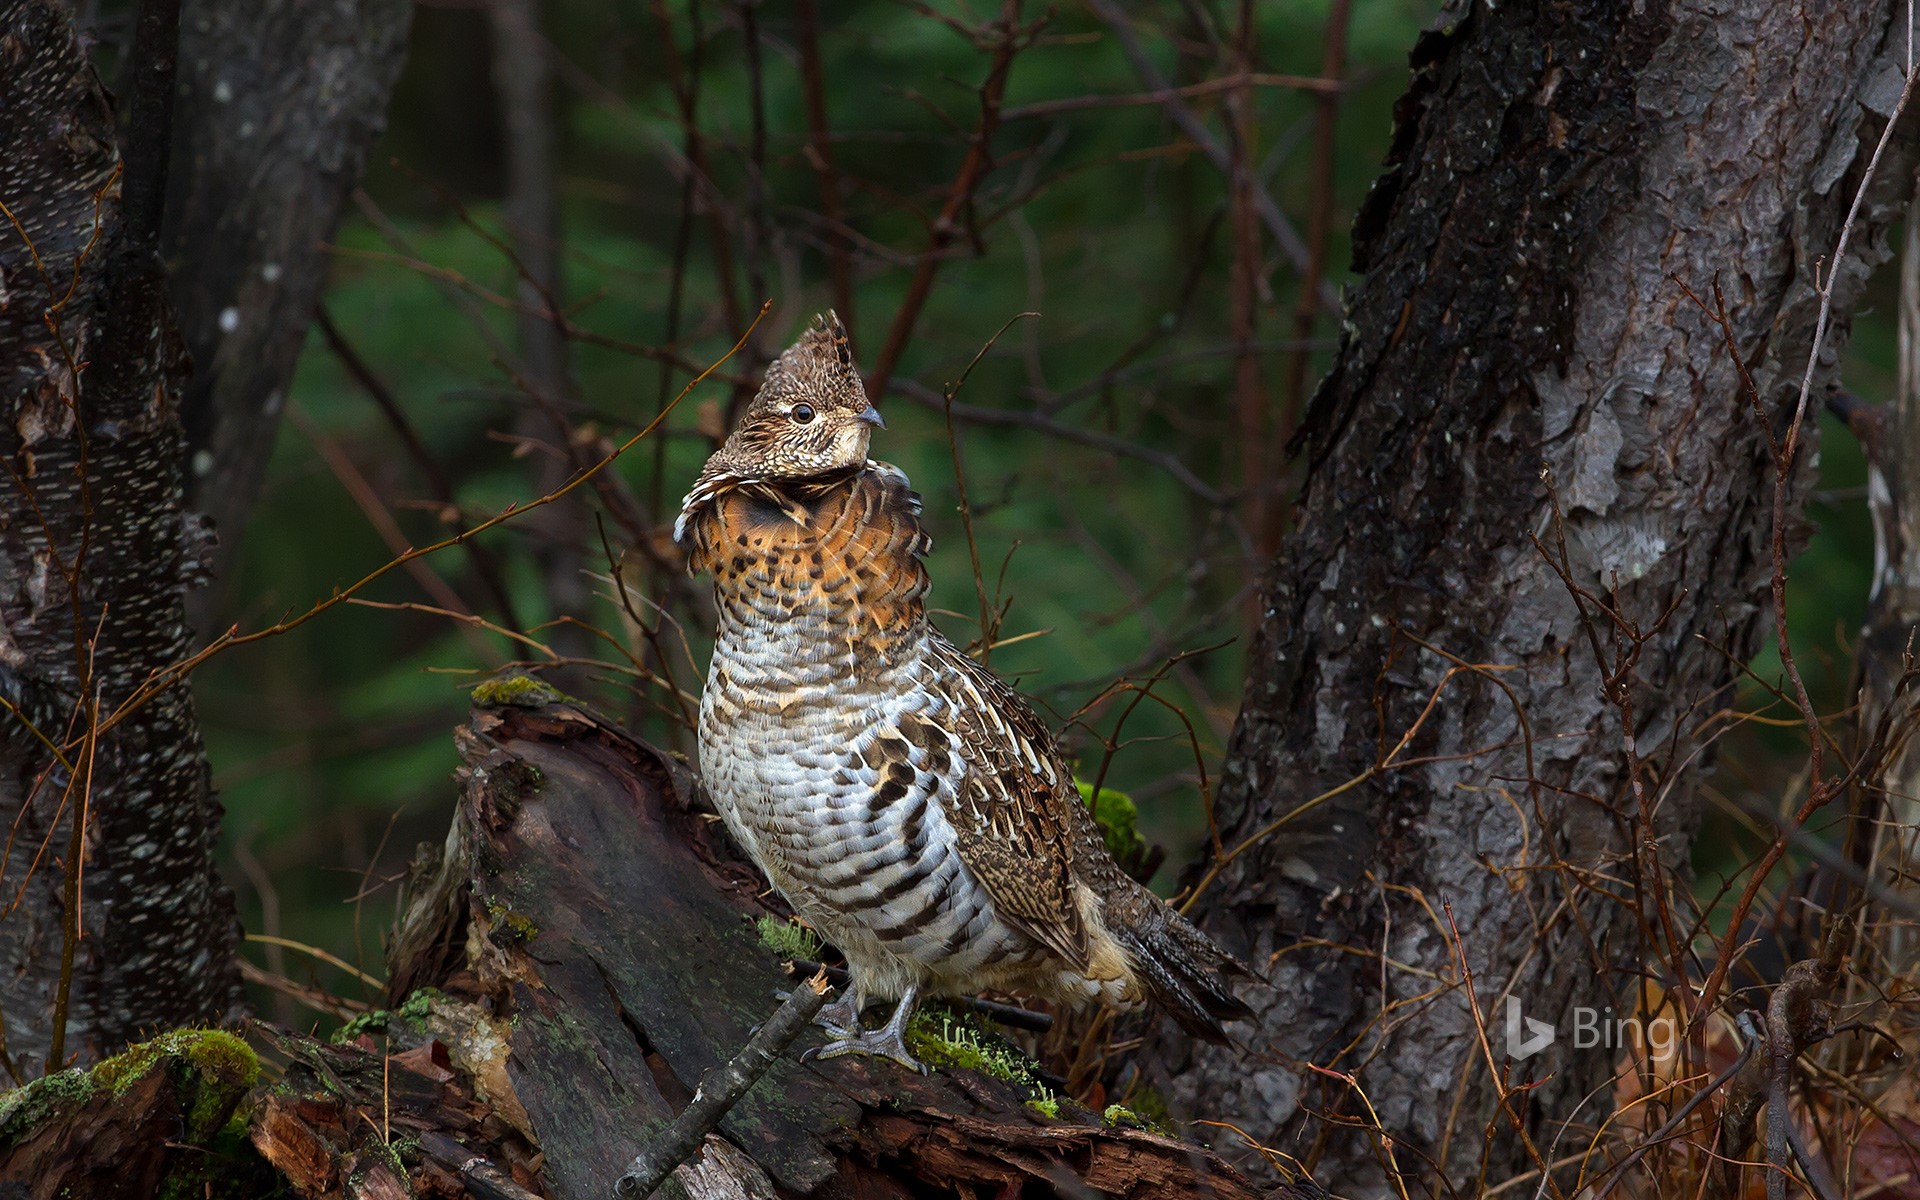 Ruffed grouse in Algonquin Provincial Park, Ontario, Canada